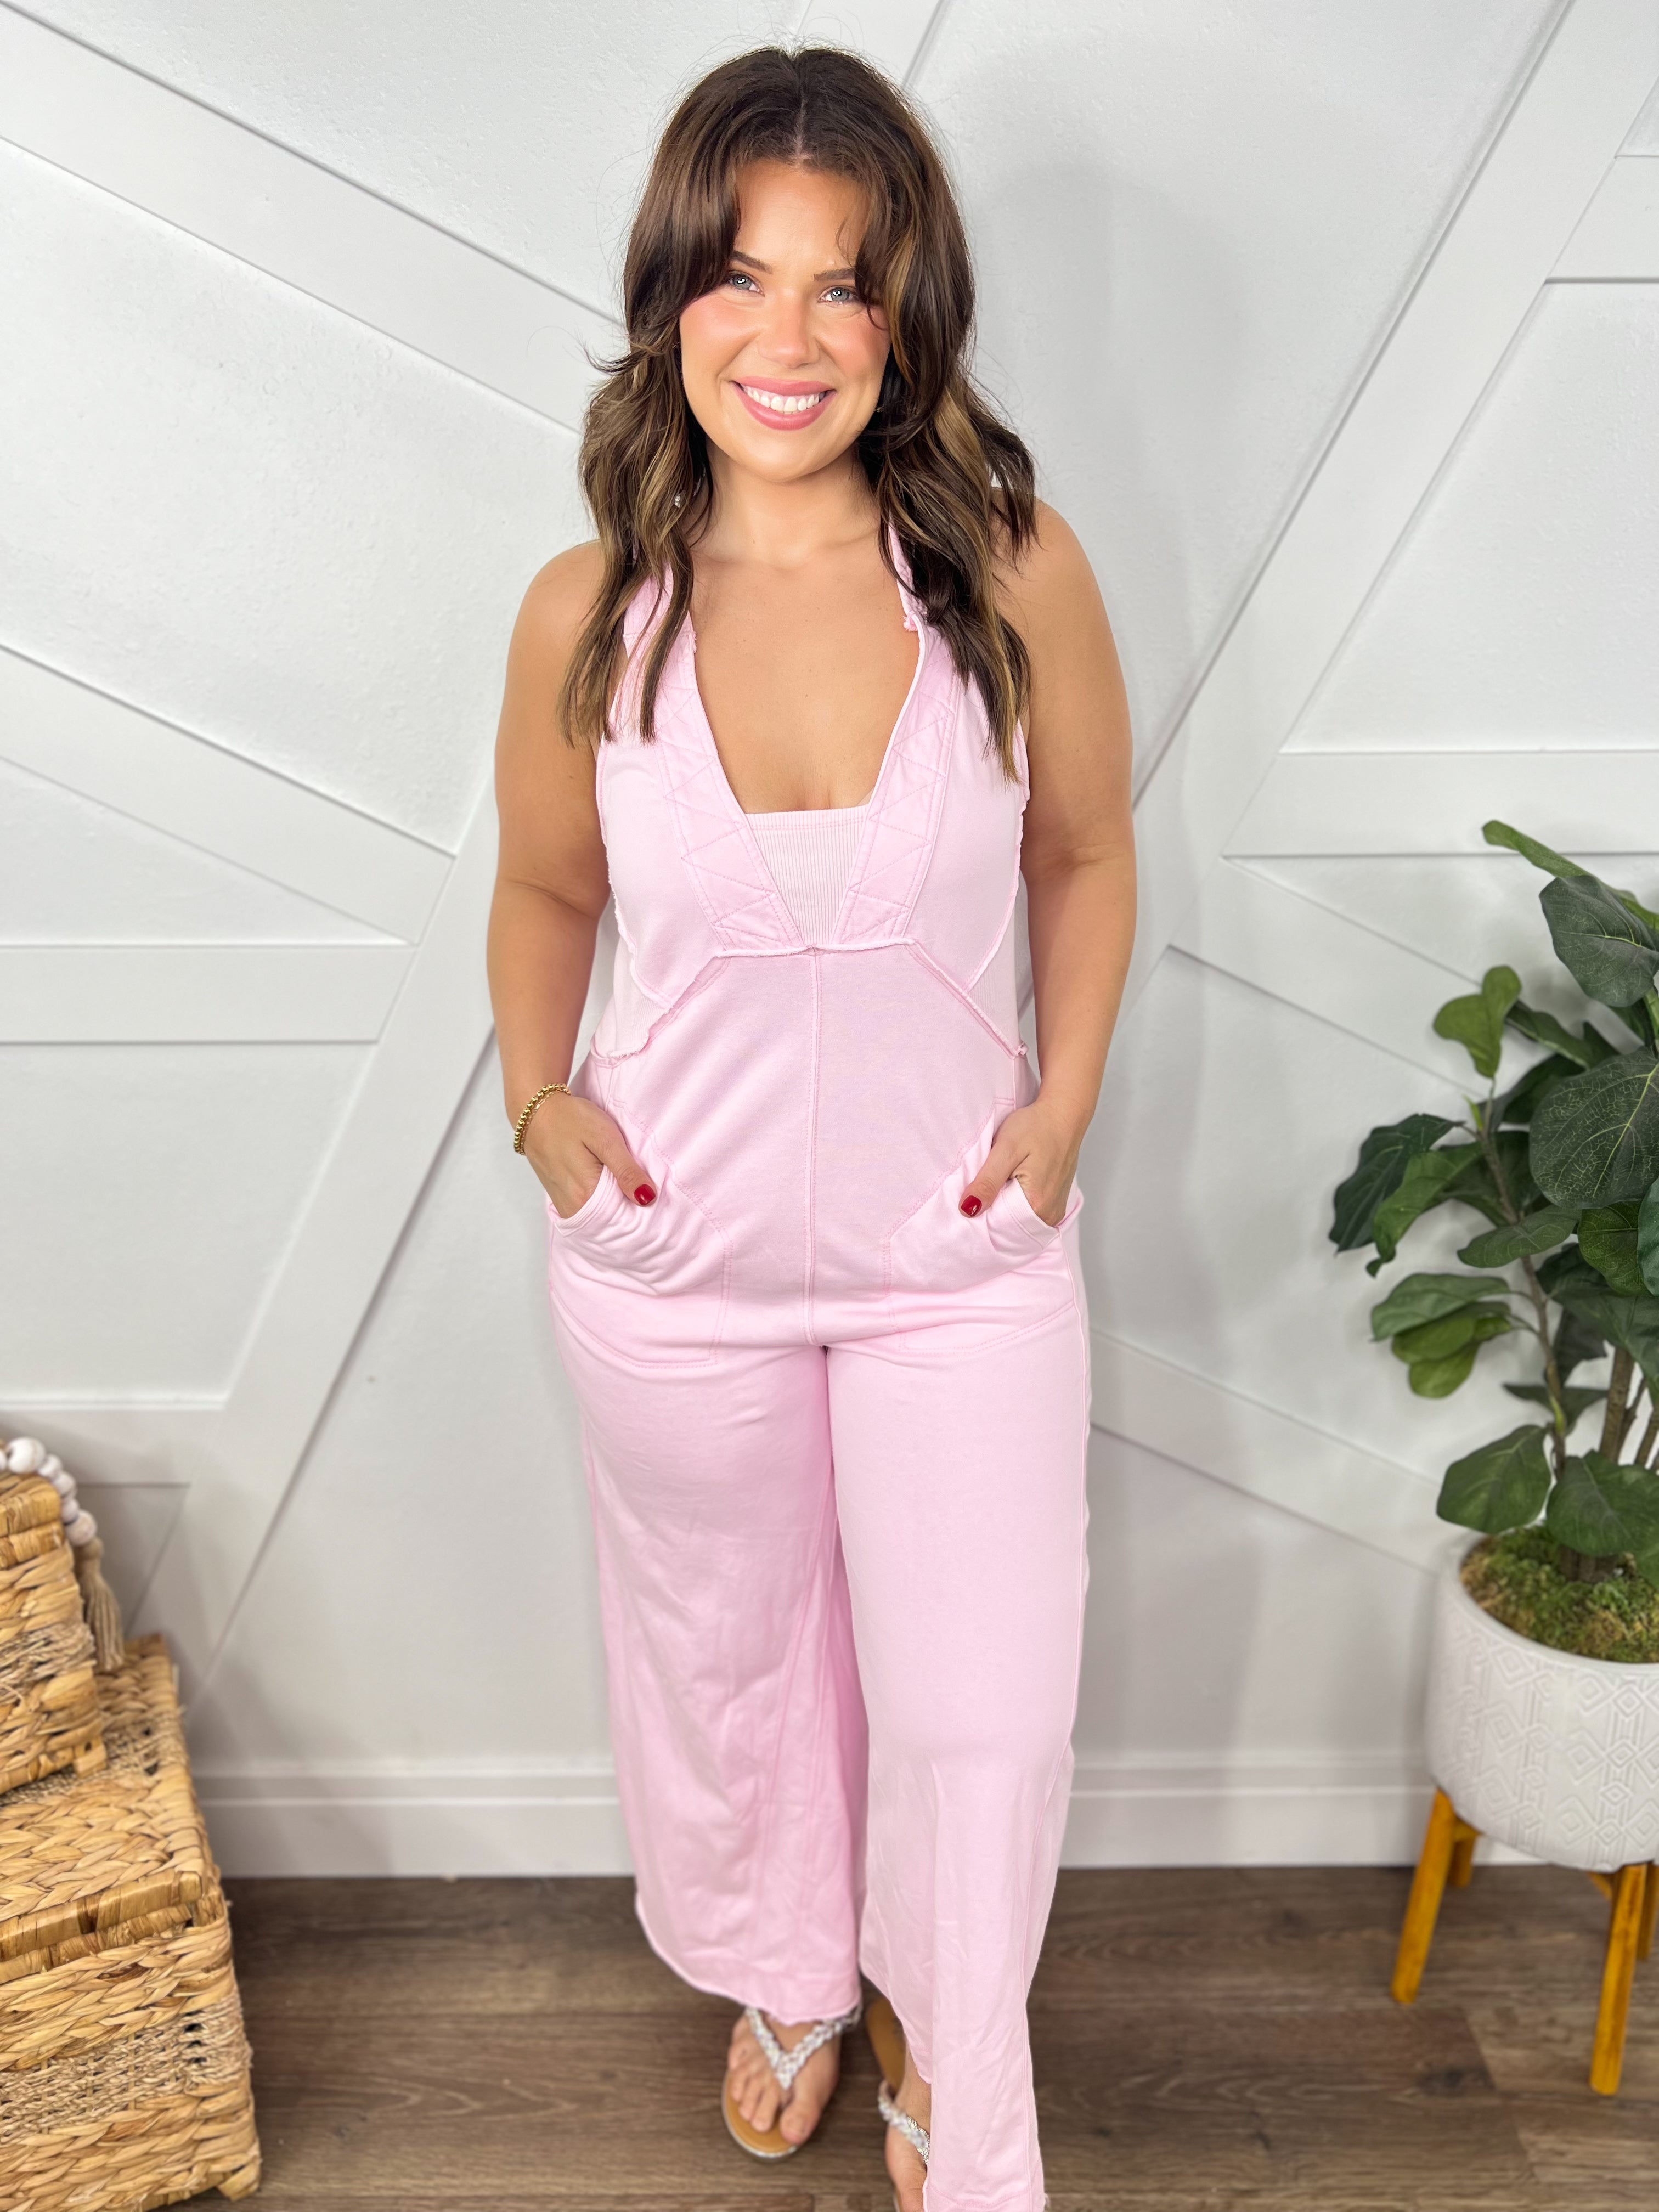 RESTOCK: Breakthrough Jumpsuit-230 Dresses/Jumpsuits/Rompers-BlueVelvet-Heathered Boho Boutique, Women's Fashion and Accessories in Palmetto, FL